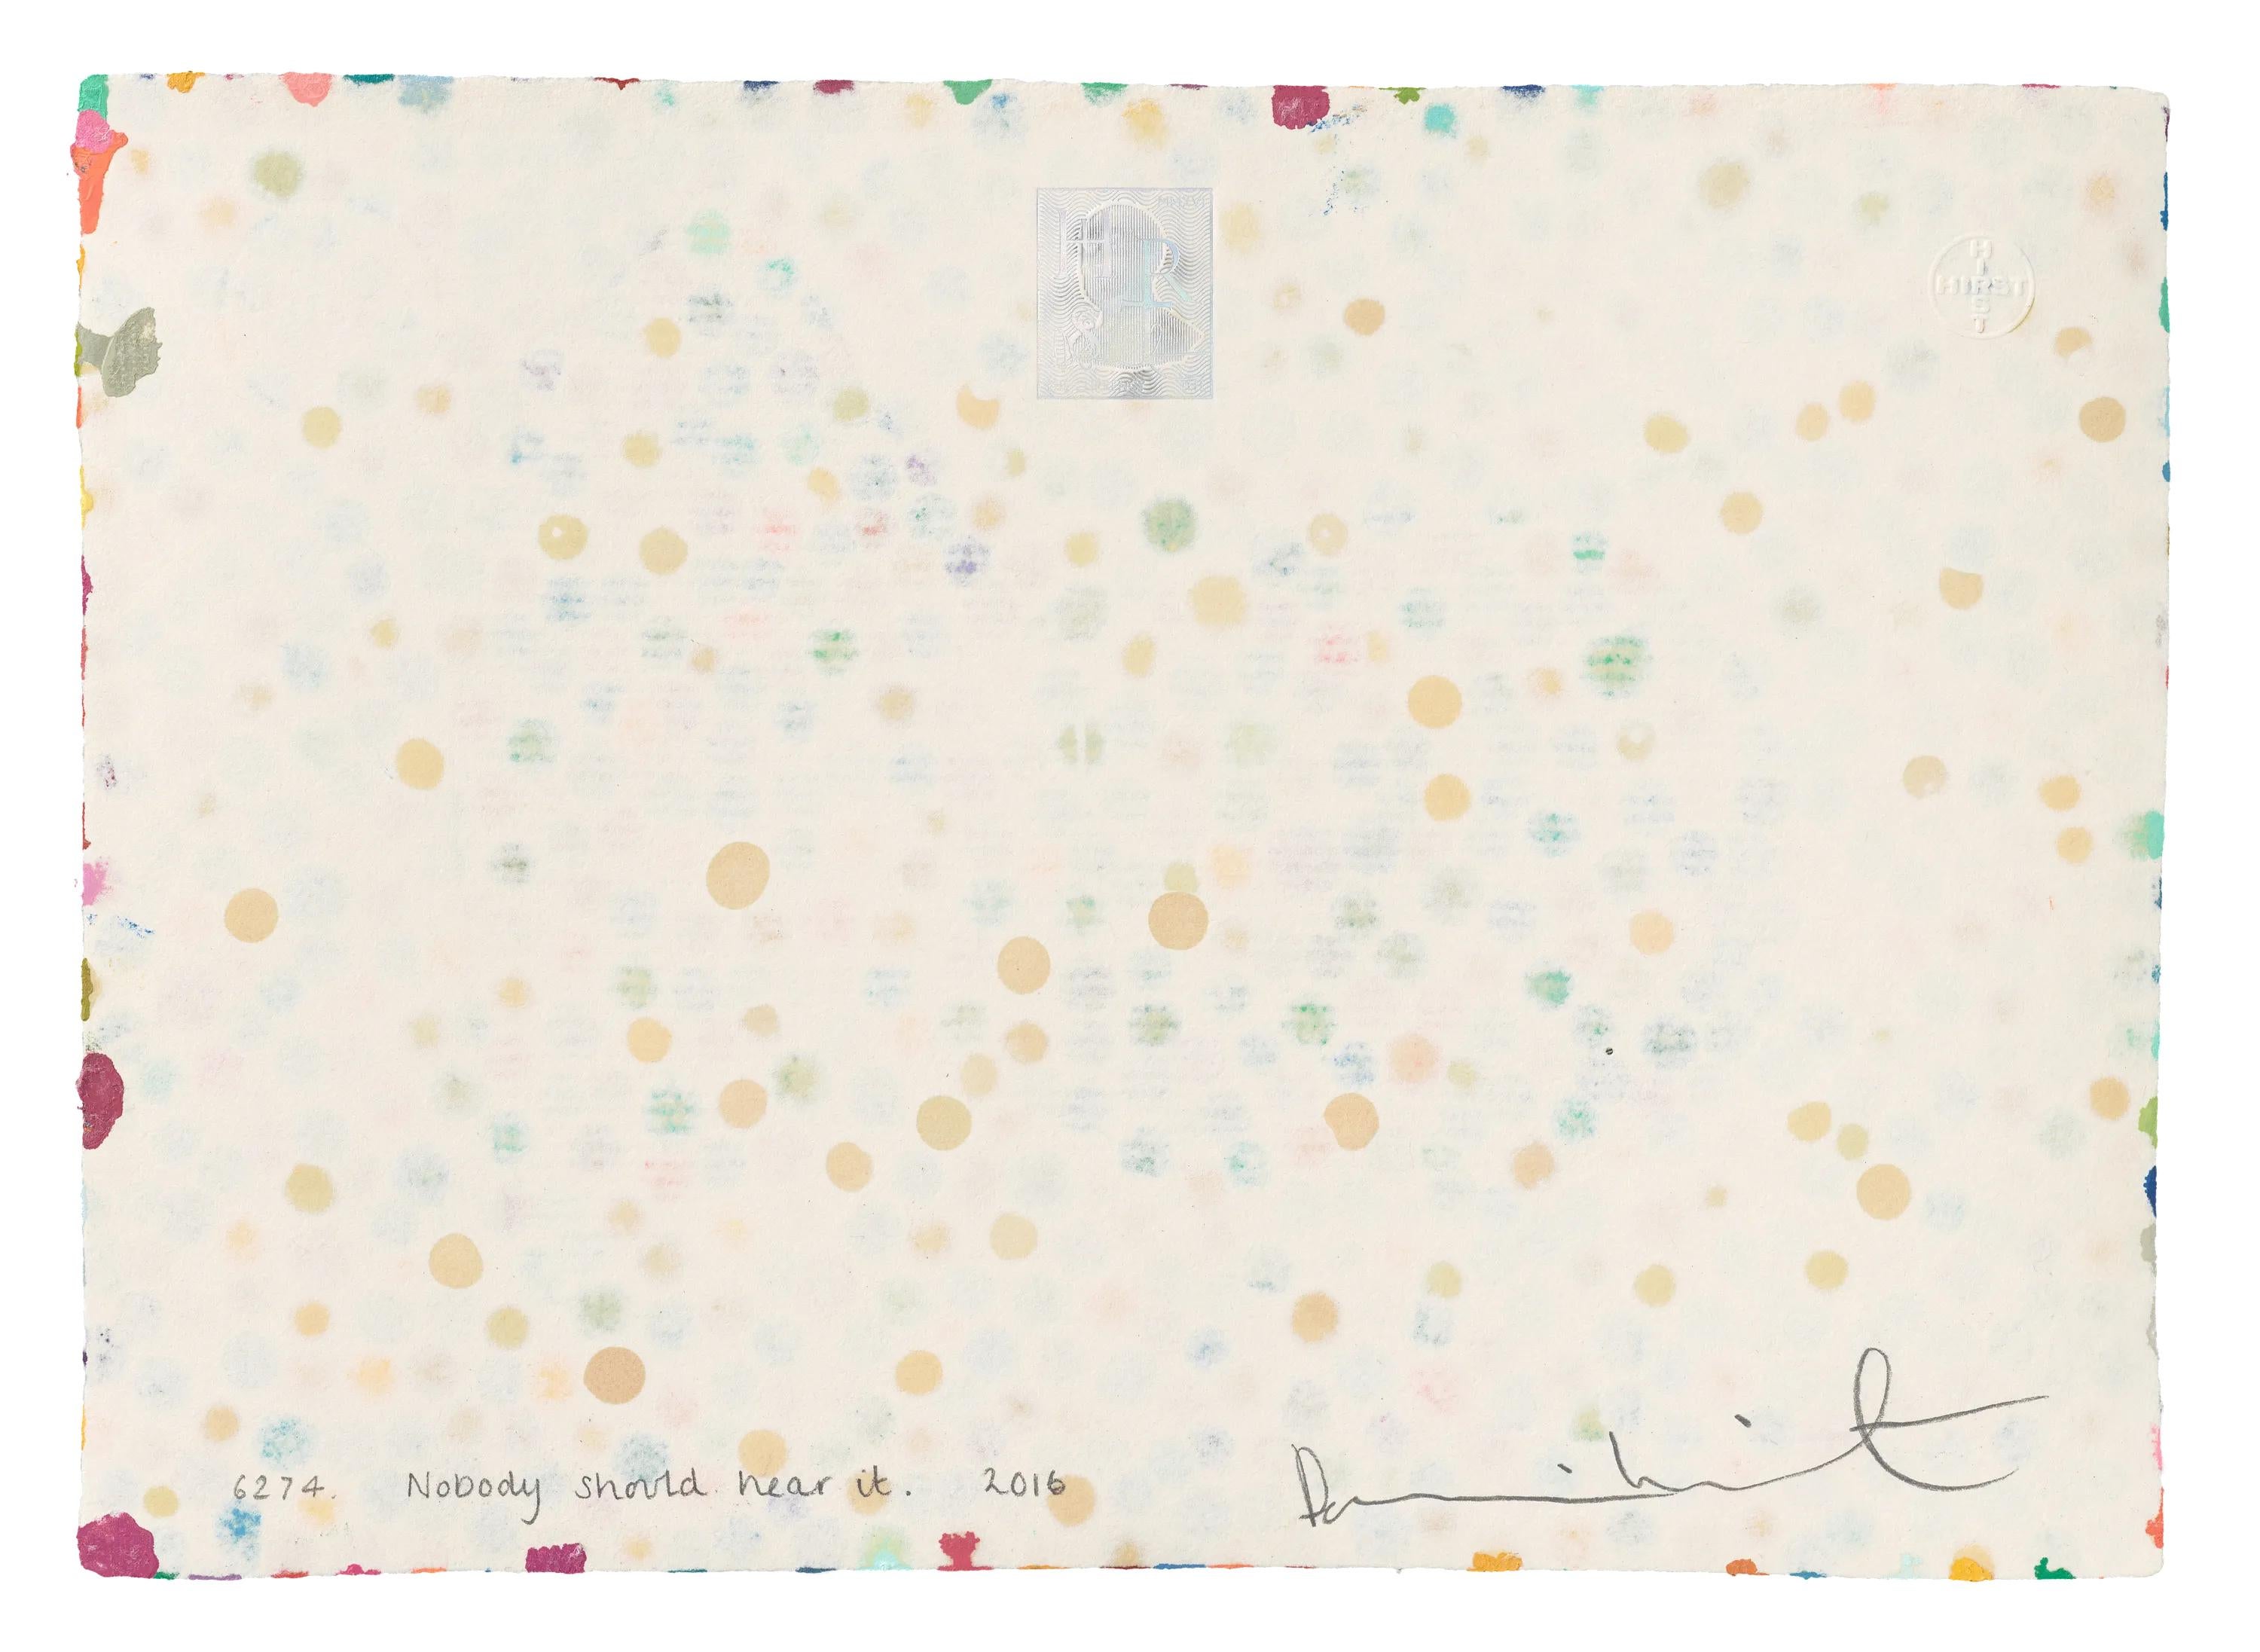 DAMIEN HIRST - THE CURRENCY. Original work The Currency Project. Dots. Colors - Painting by Damien Hirst